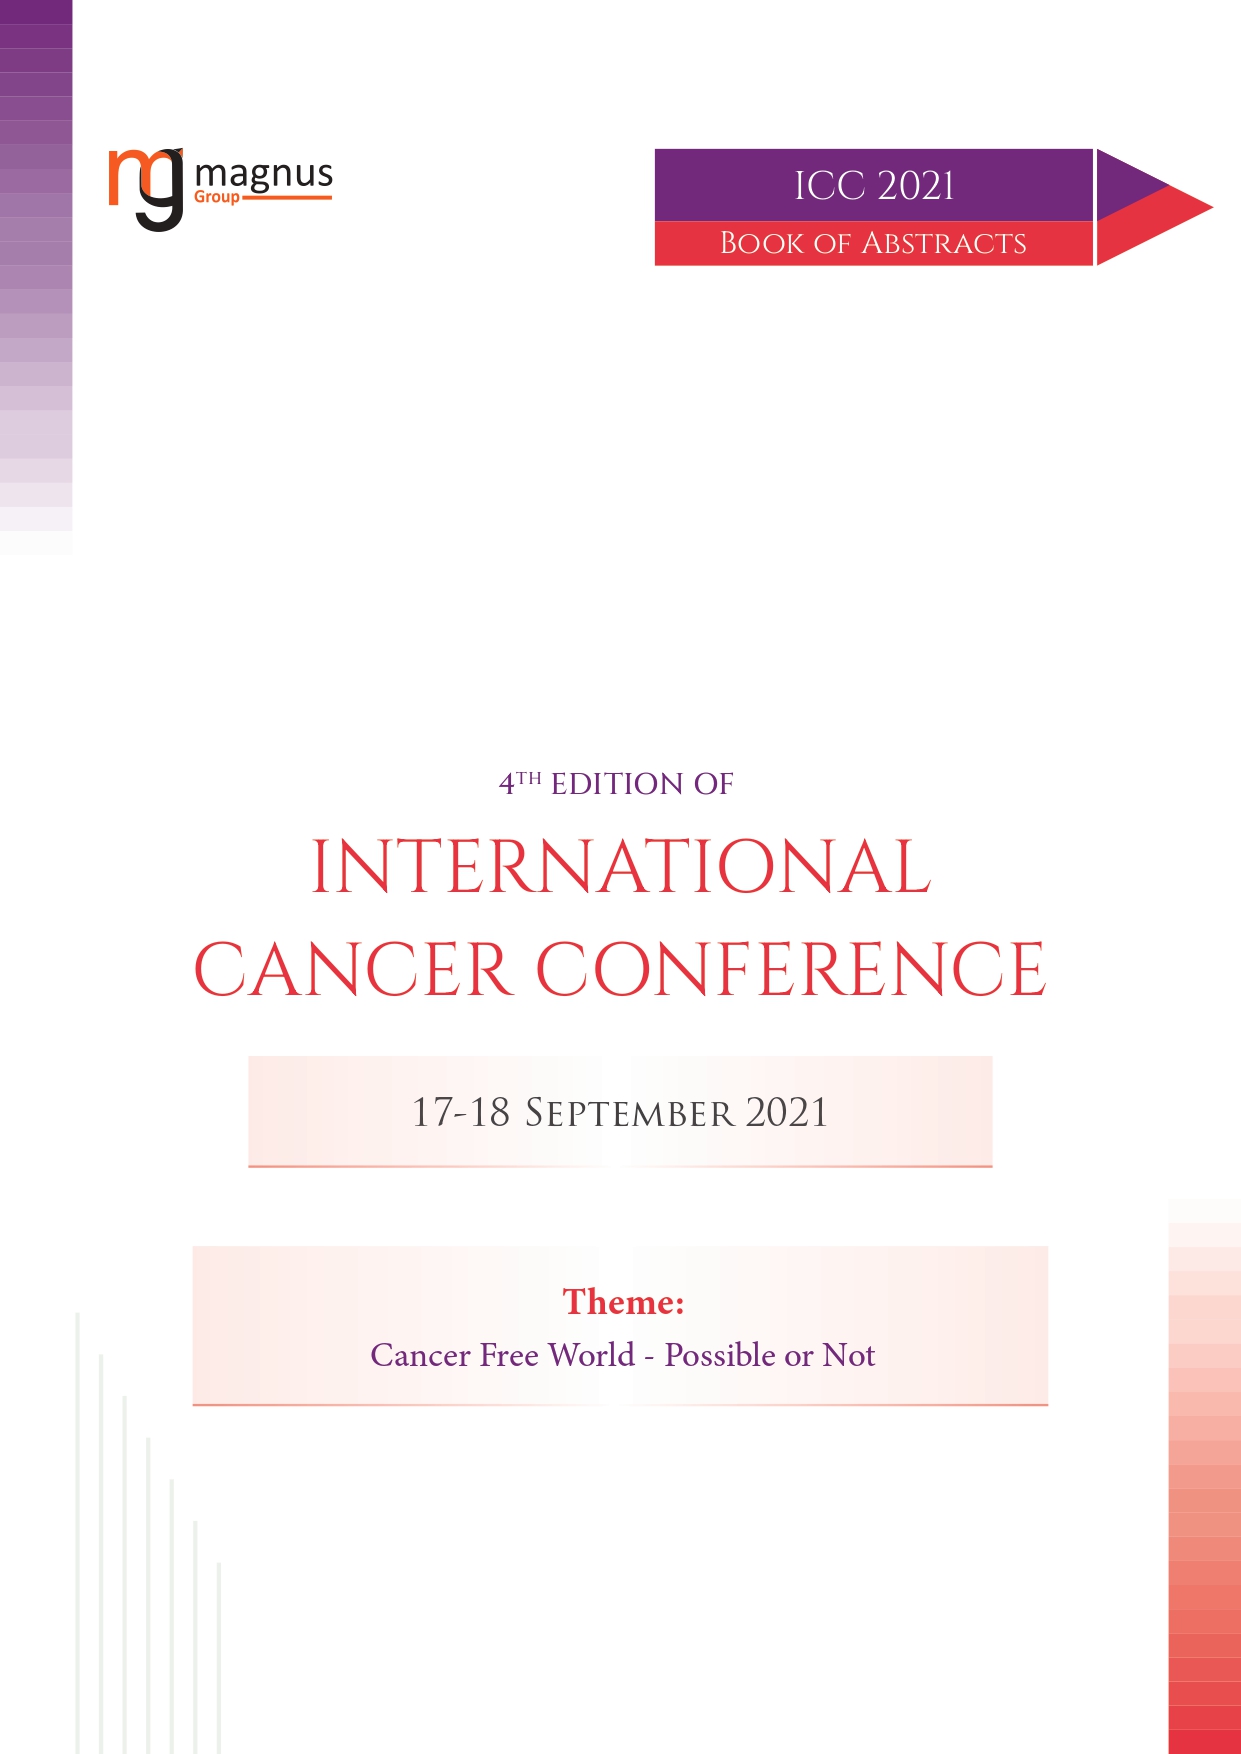 Cancer Conference | Online Event Event Book